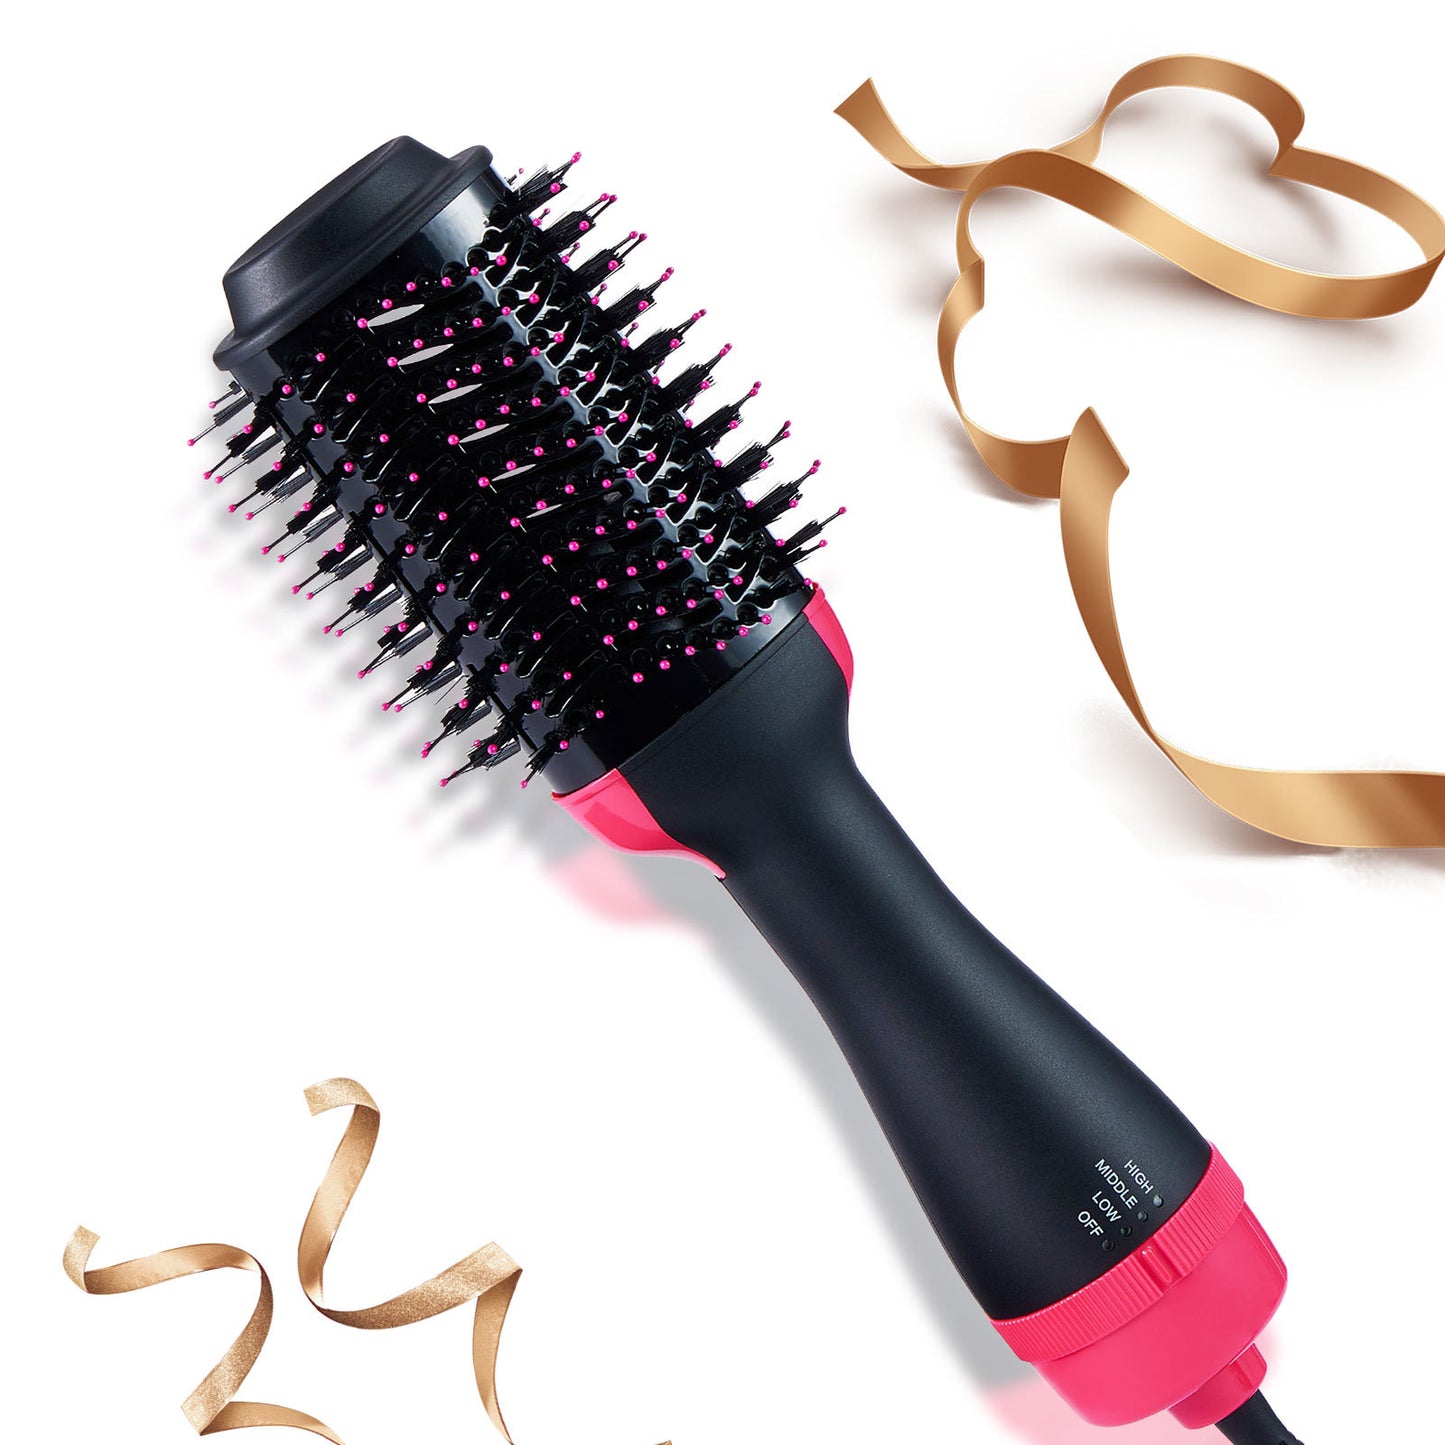 Hair Dryer Brush,Hair Volumizer for Drying & Straightening & Curling,Brush Blow Dryer Styler for Rotating Straightening, Curling, Salon Negative Ion Ceramic Dryer Brush -Amazon Restricted Products